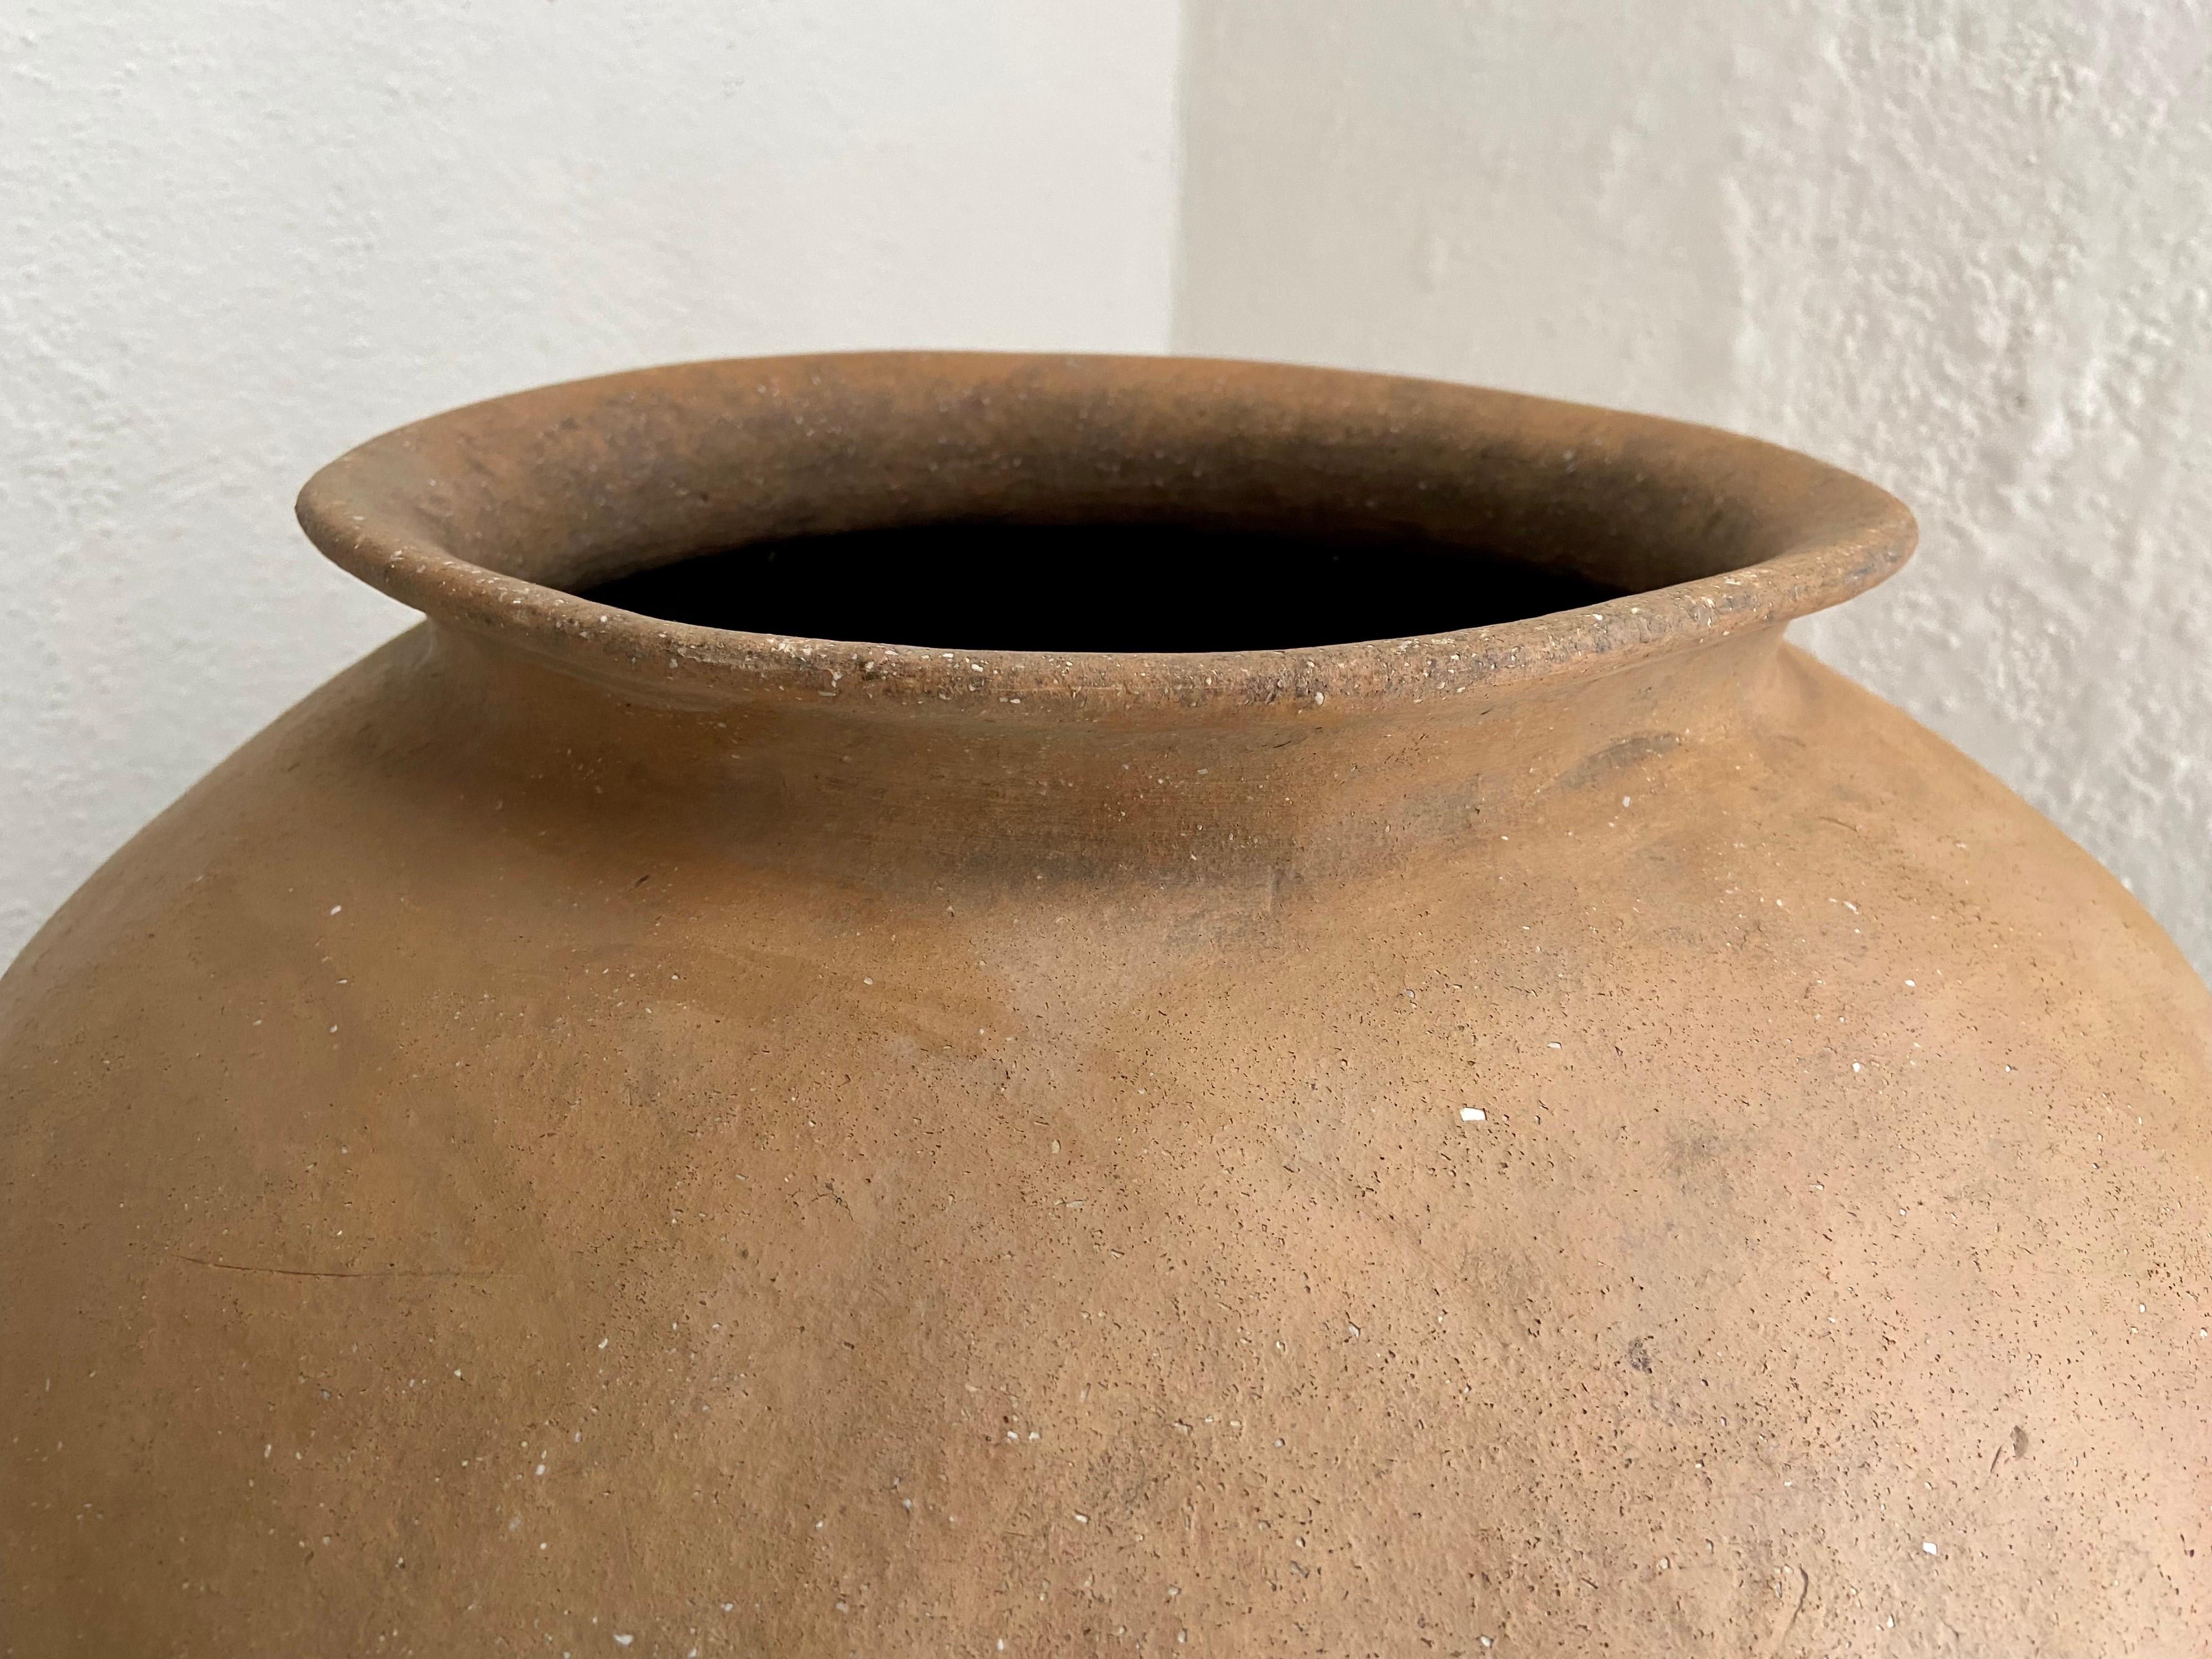 Country Terracotta Pot From Mexico, Early 20th Century